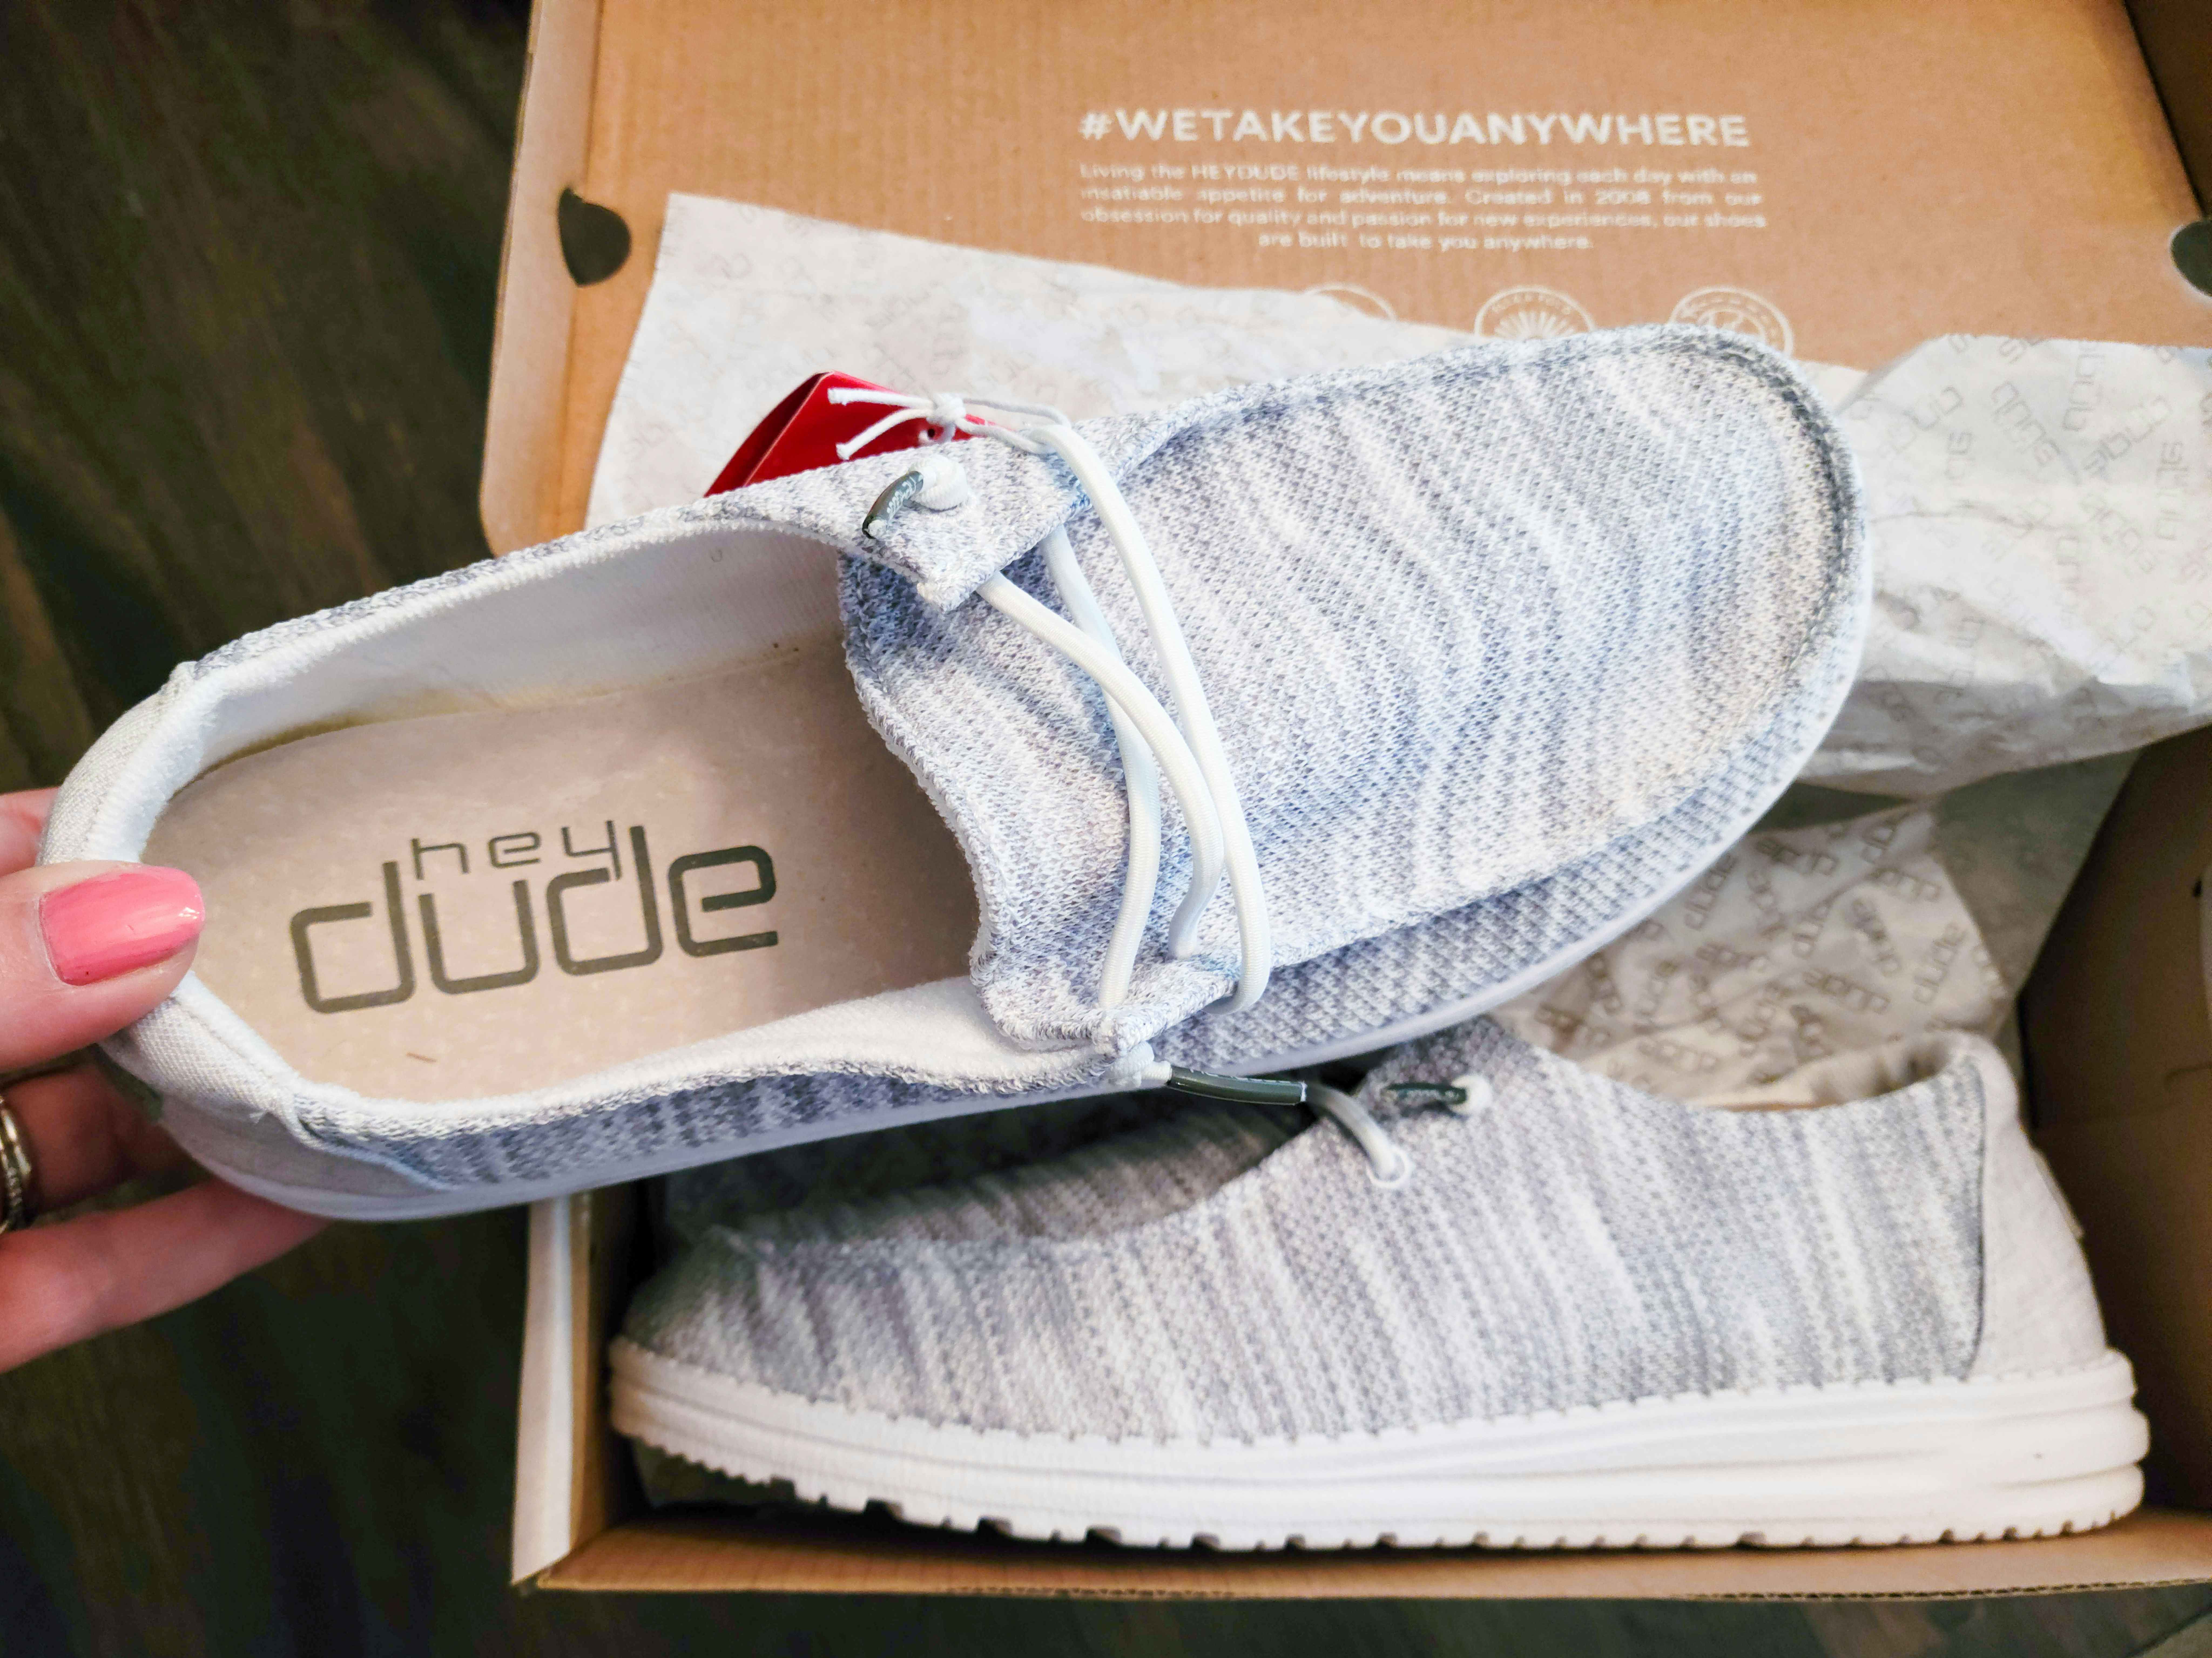 A person's hand holding a grey Hey Dude Sneaker, showing off the inner label above the other shoe still in the box.